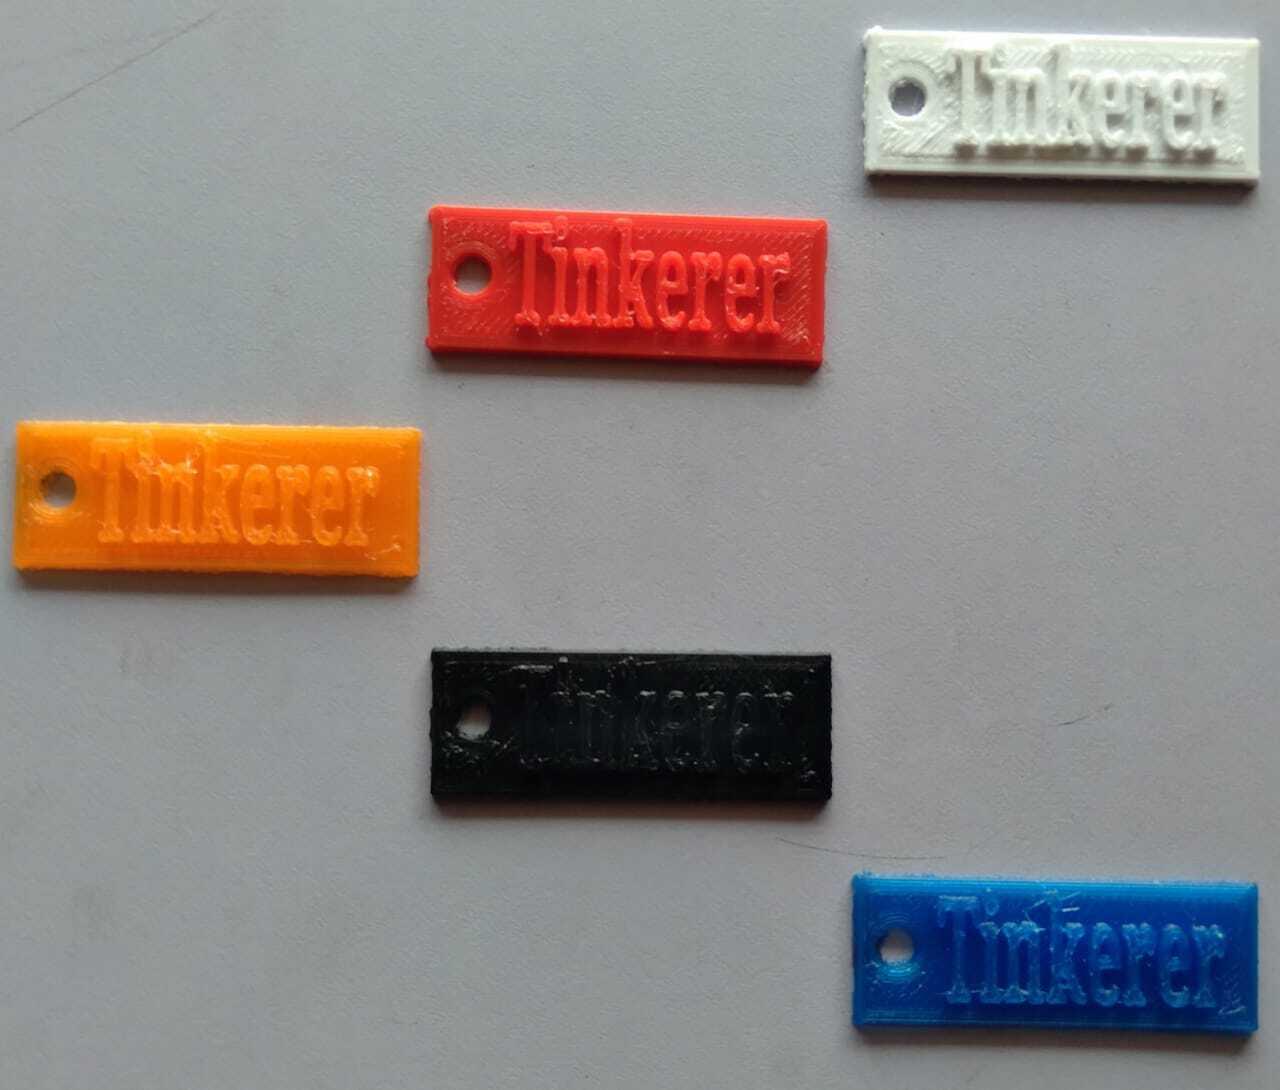 Personalized_3D-Printed_KeyChains_1.jpg